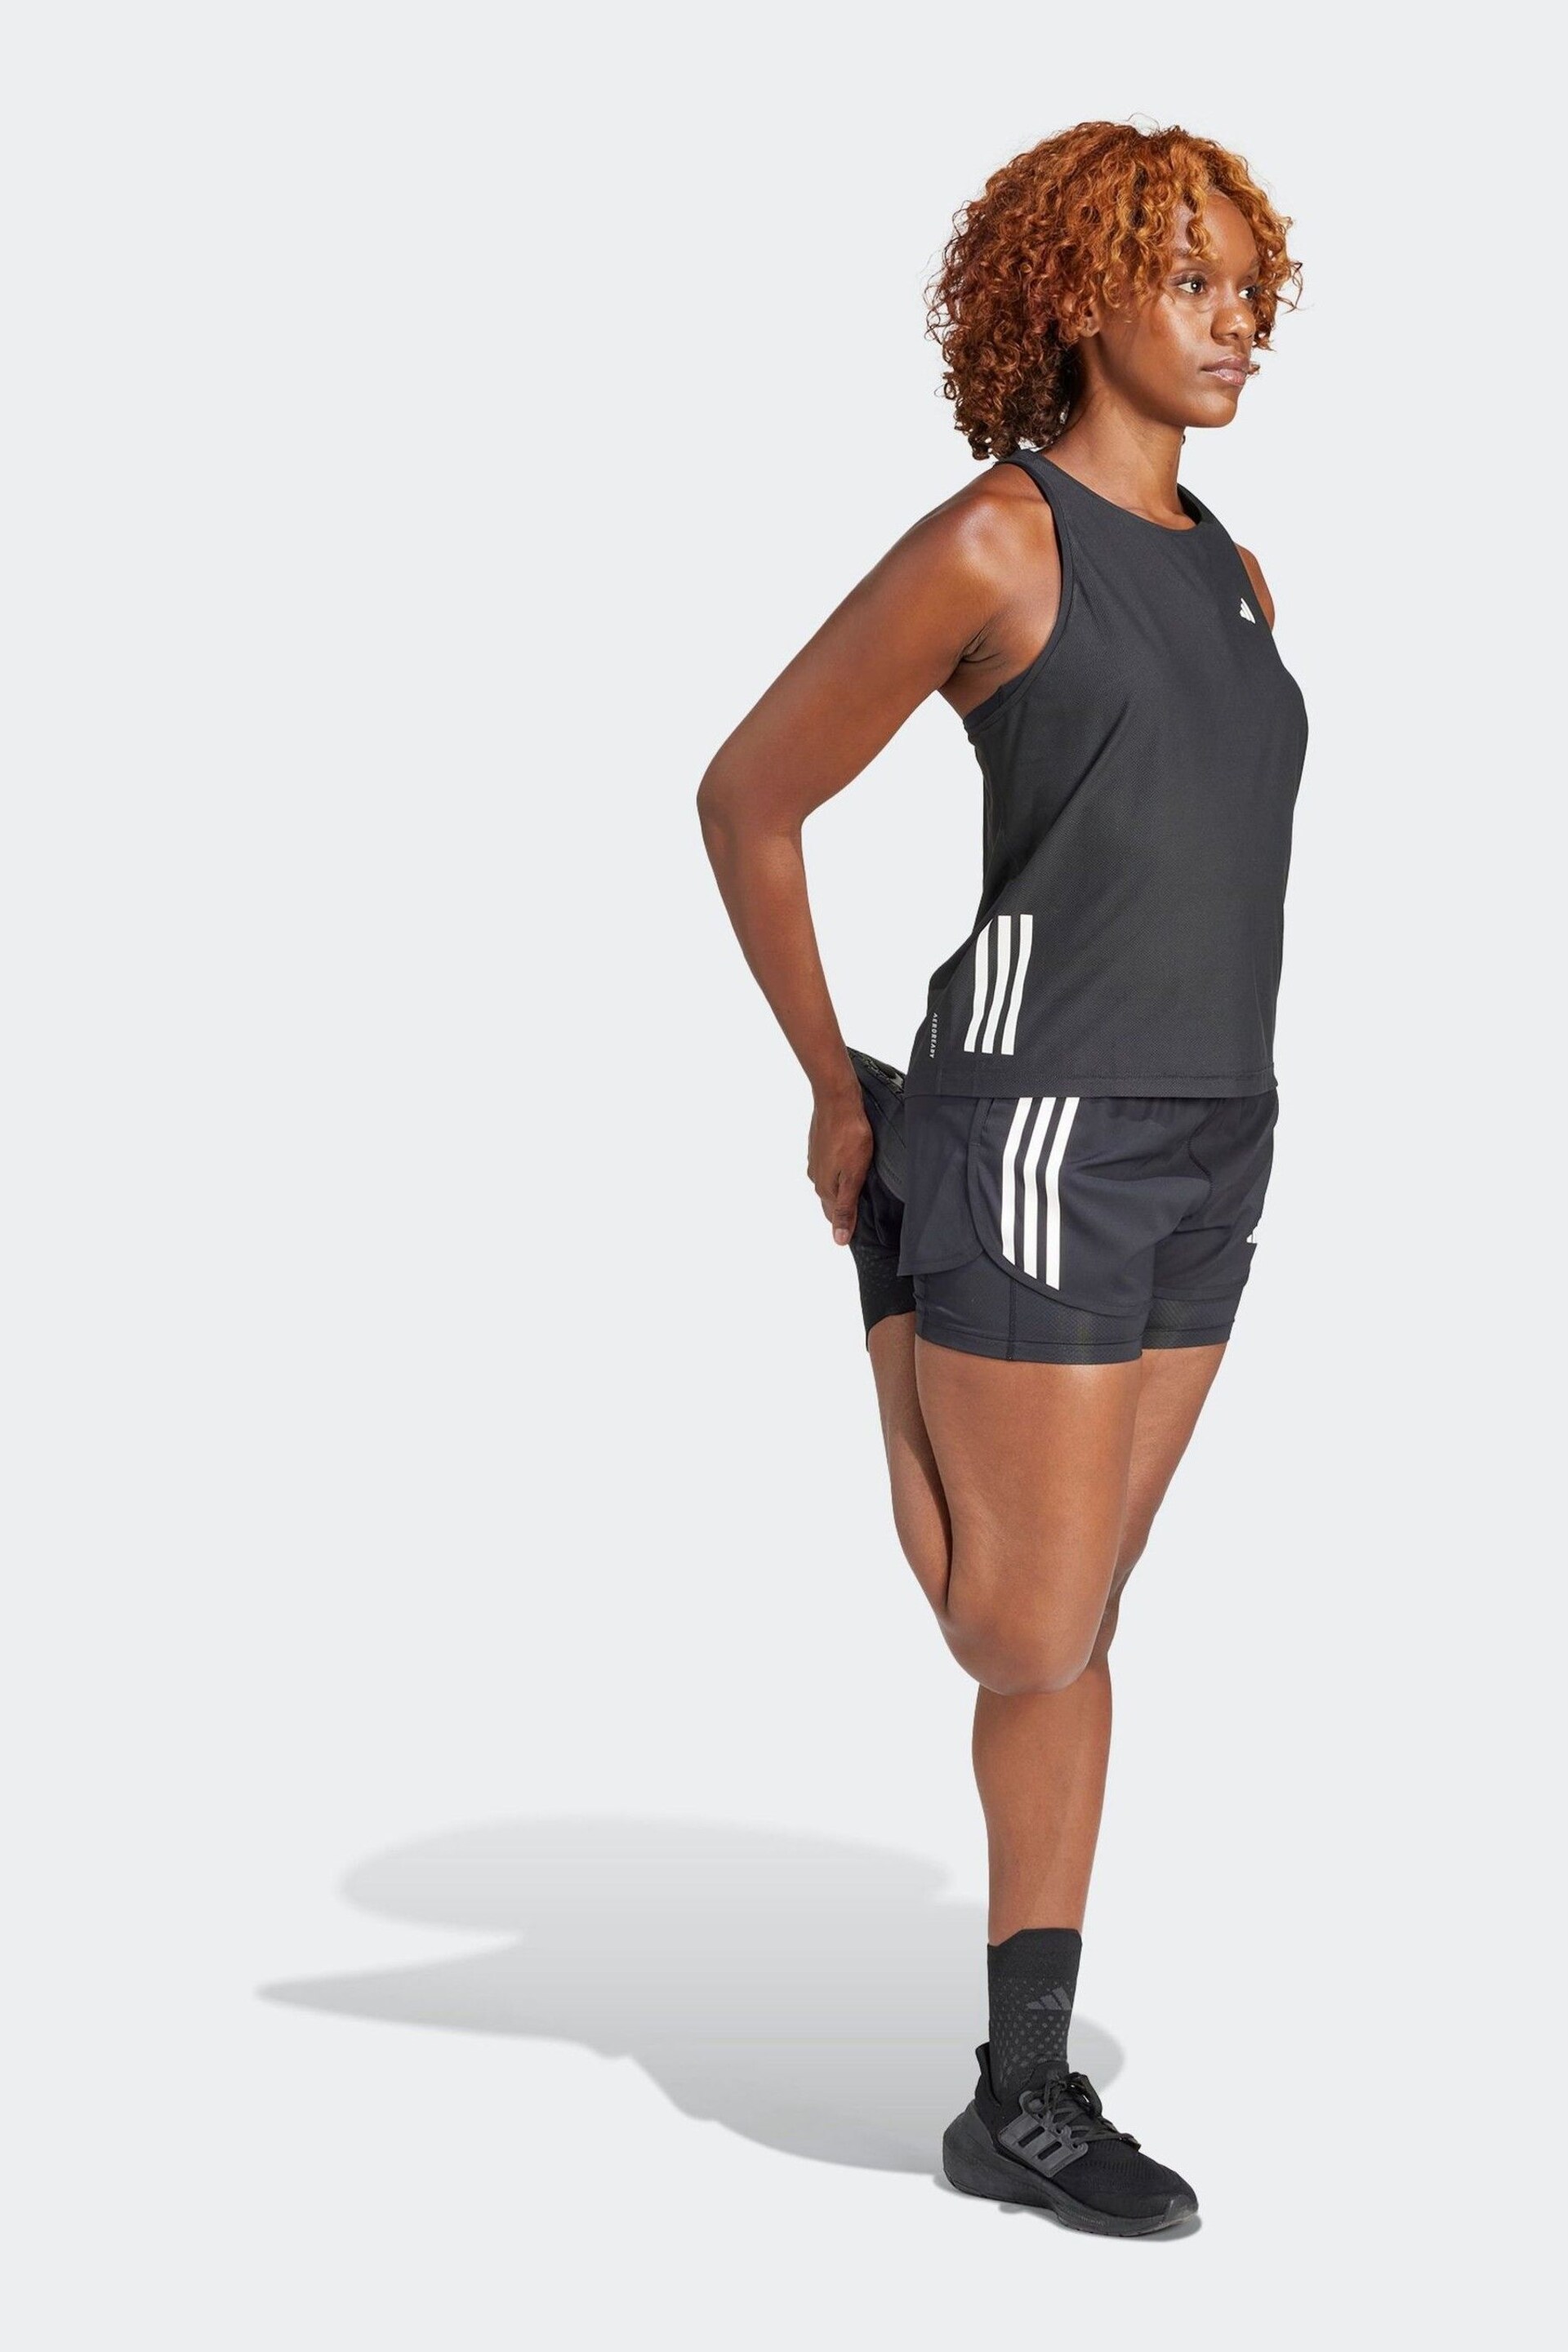 adidas Black 3 Strip 2-in-1 Shorts - Image 3 of 6